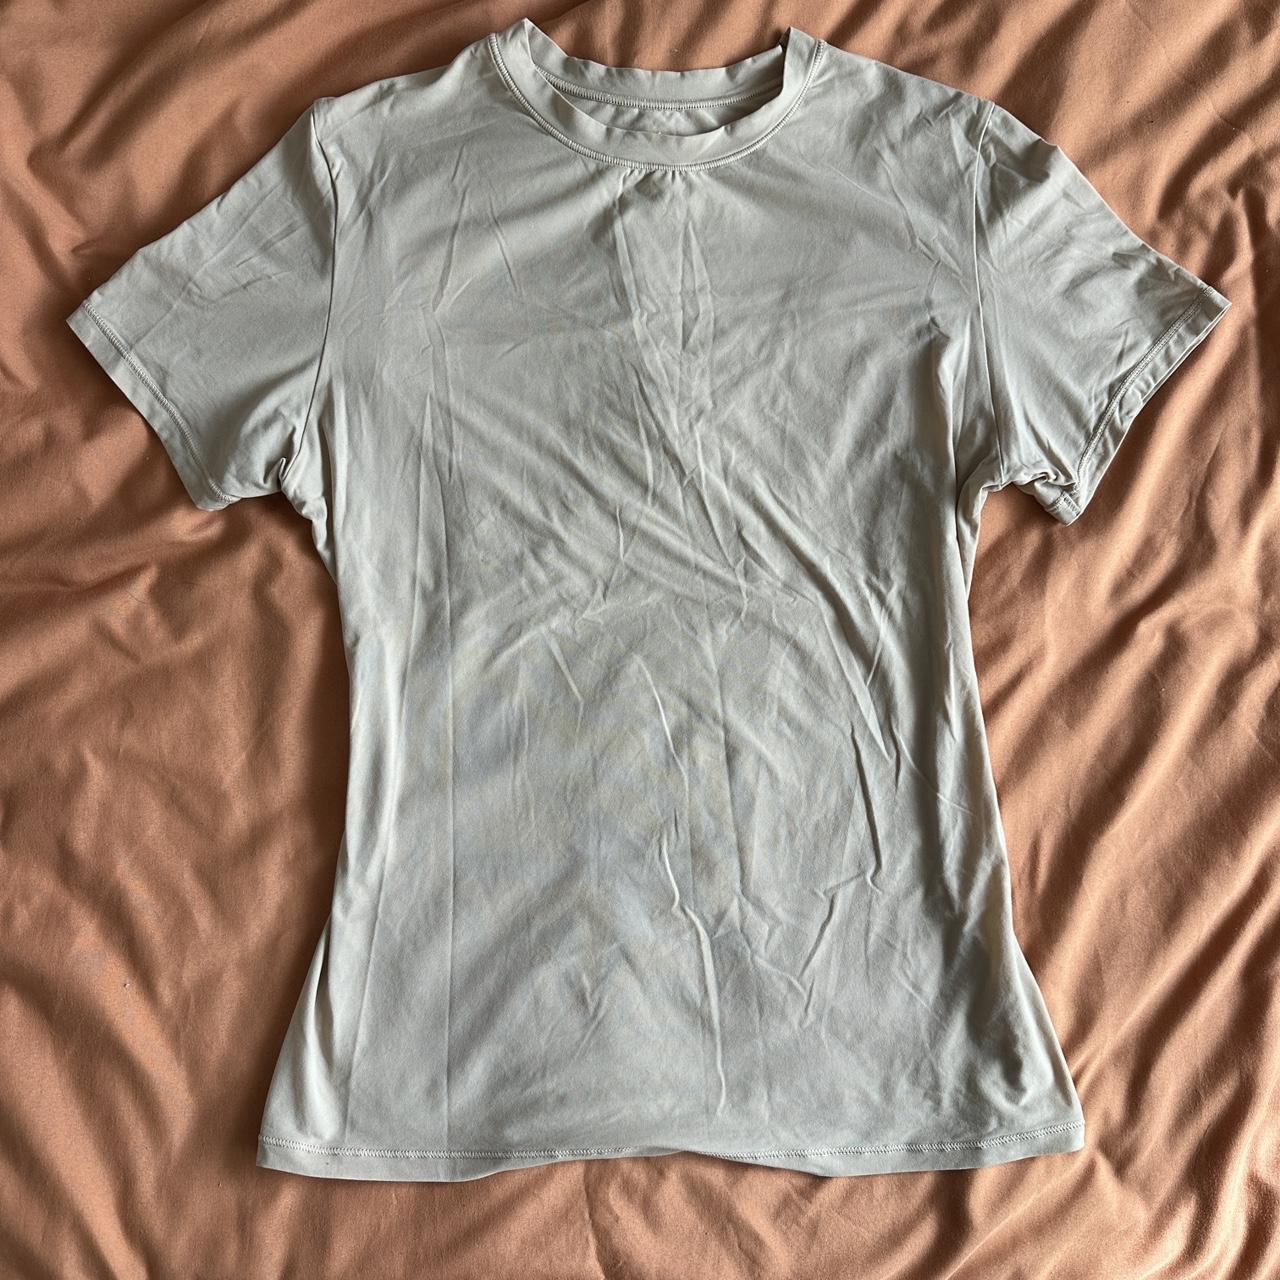 skims fits everybody tee! tag is a worn, and there - Depop